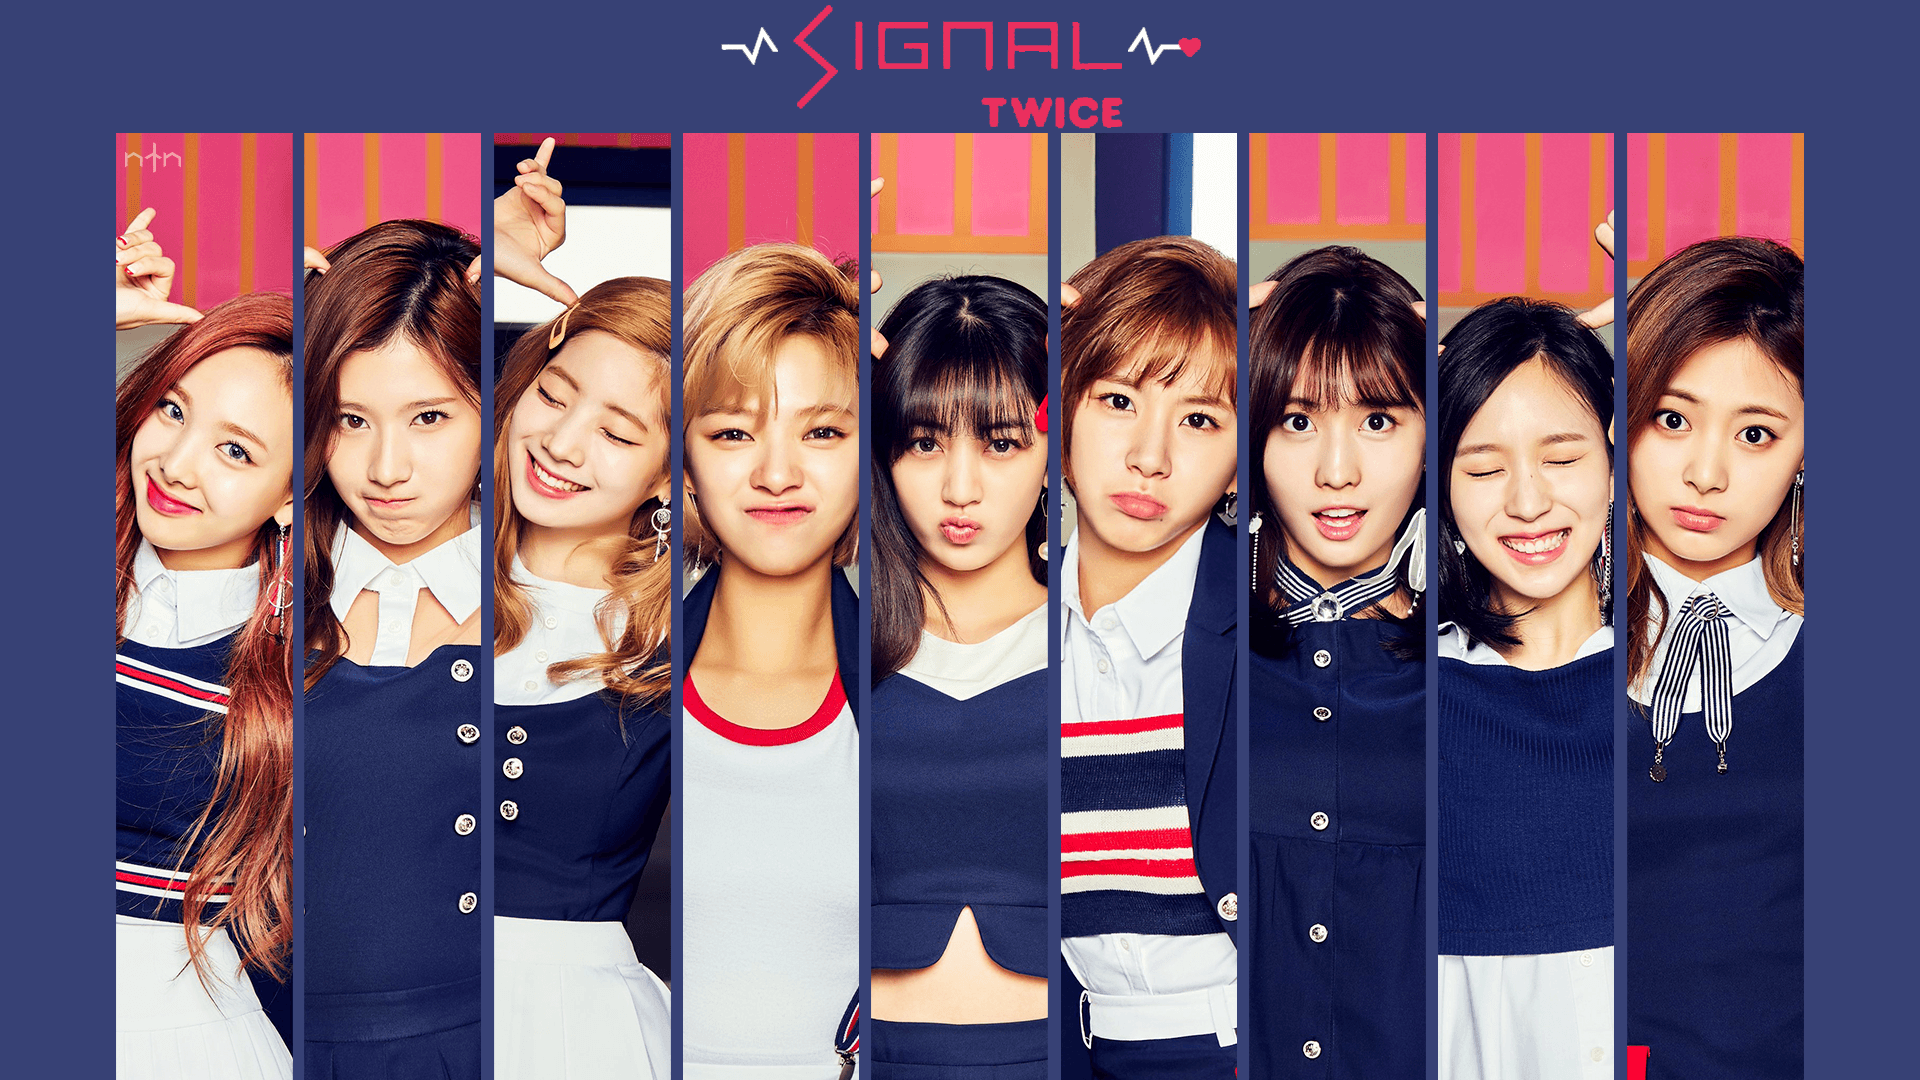 JEONGYEON TWICE CLEAR BACKGROUND HD IMAGES DOWNLOAD